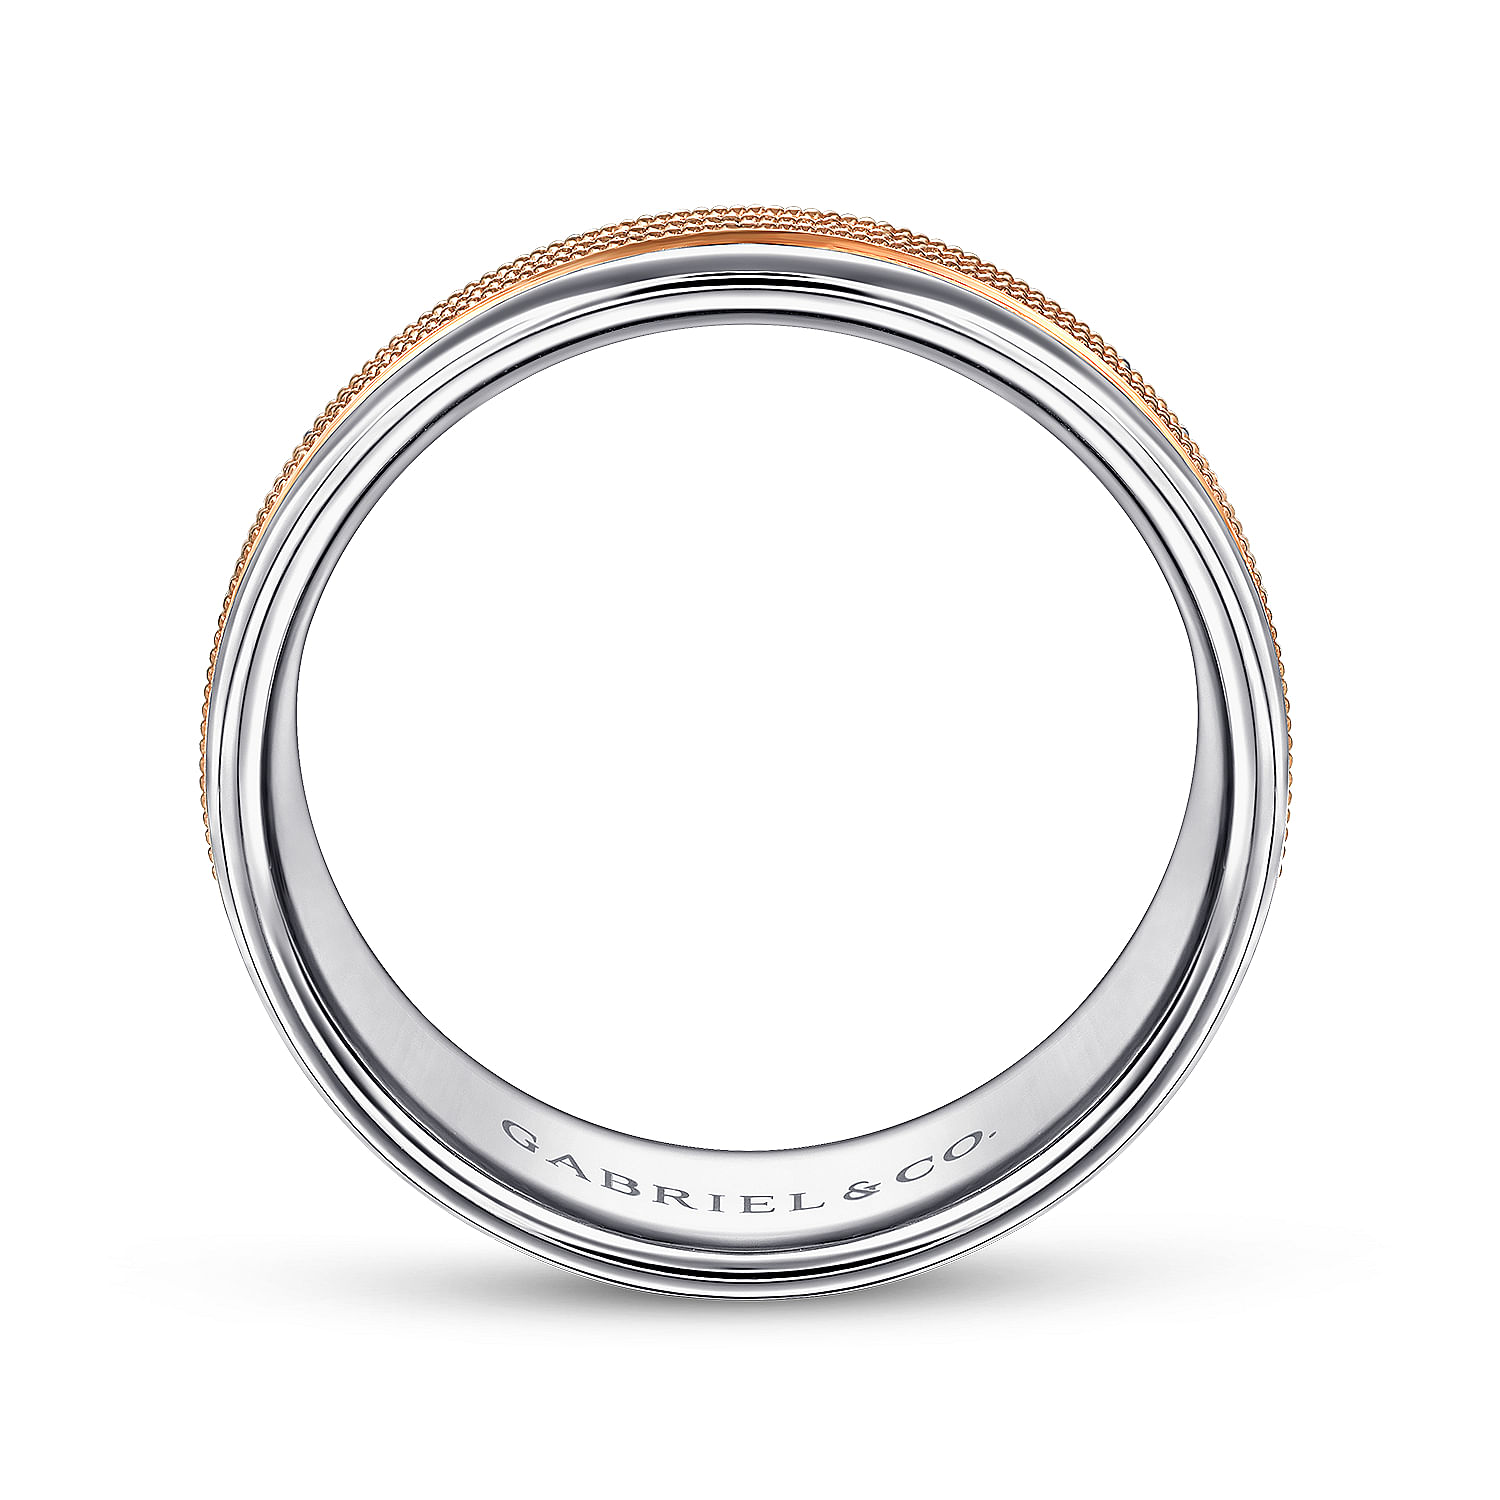 Ethan - 14K White-Rose Gold 7mm - Two Tone Men's Wedding Band in High Polished Finish - Shot 2